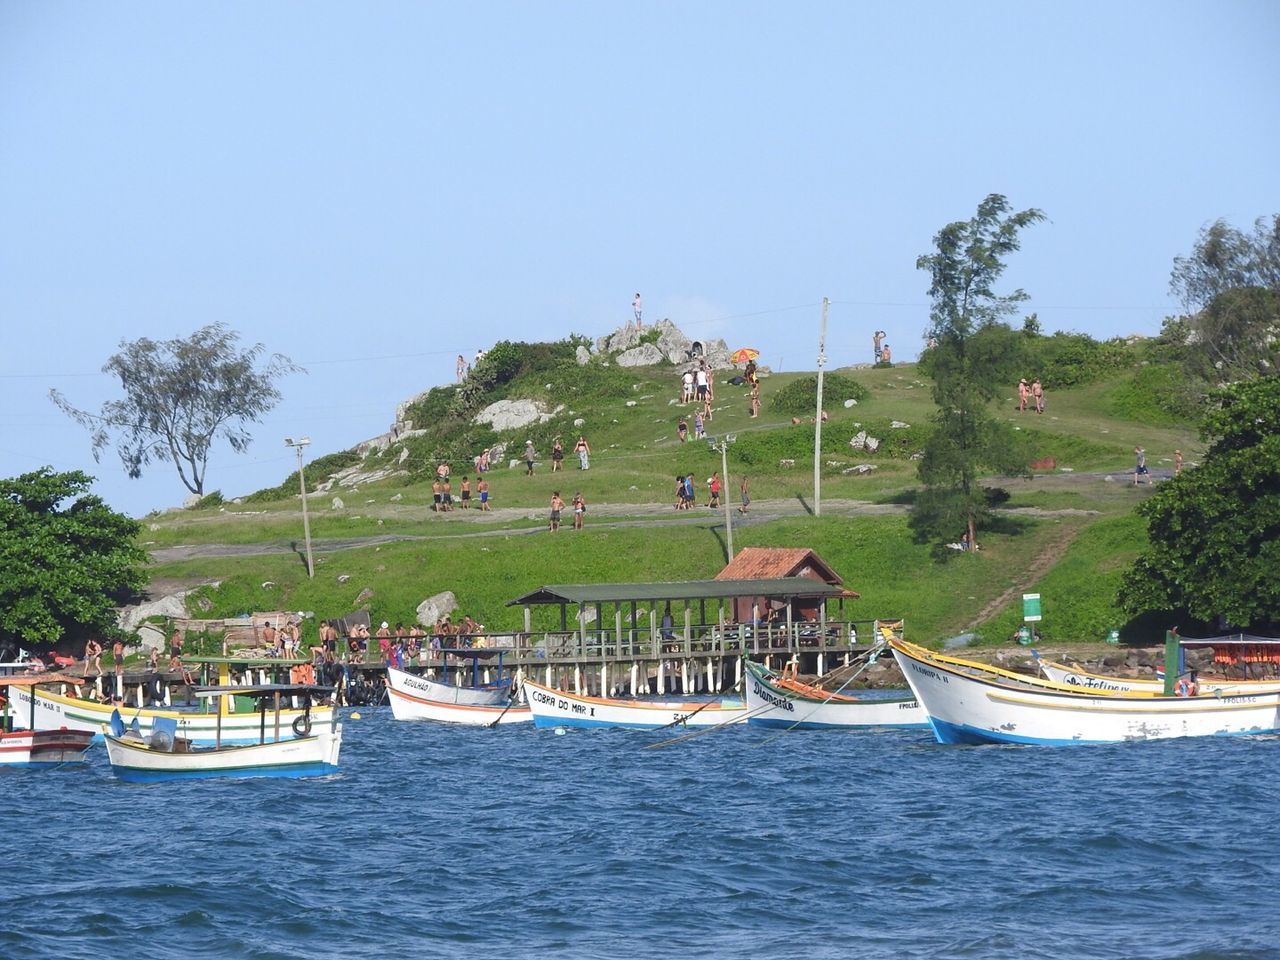 BOATS IN SEA WITH BUILDINGS IN BACKGROUND